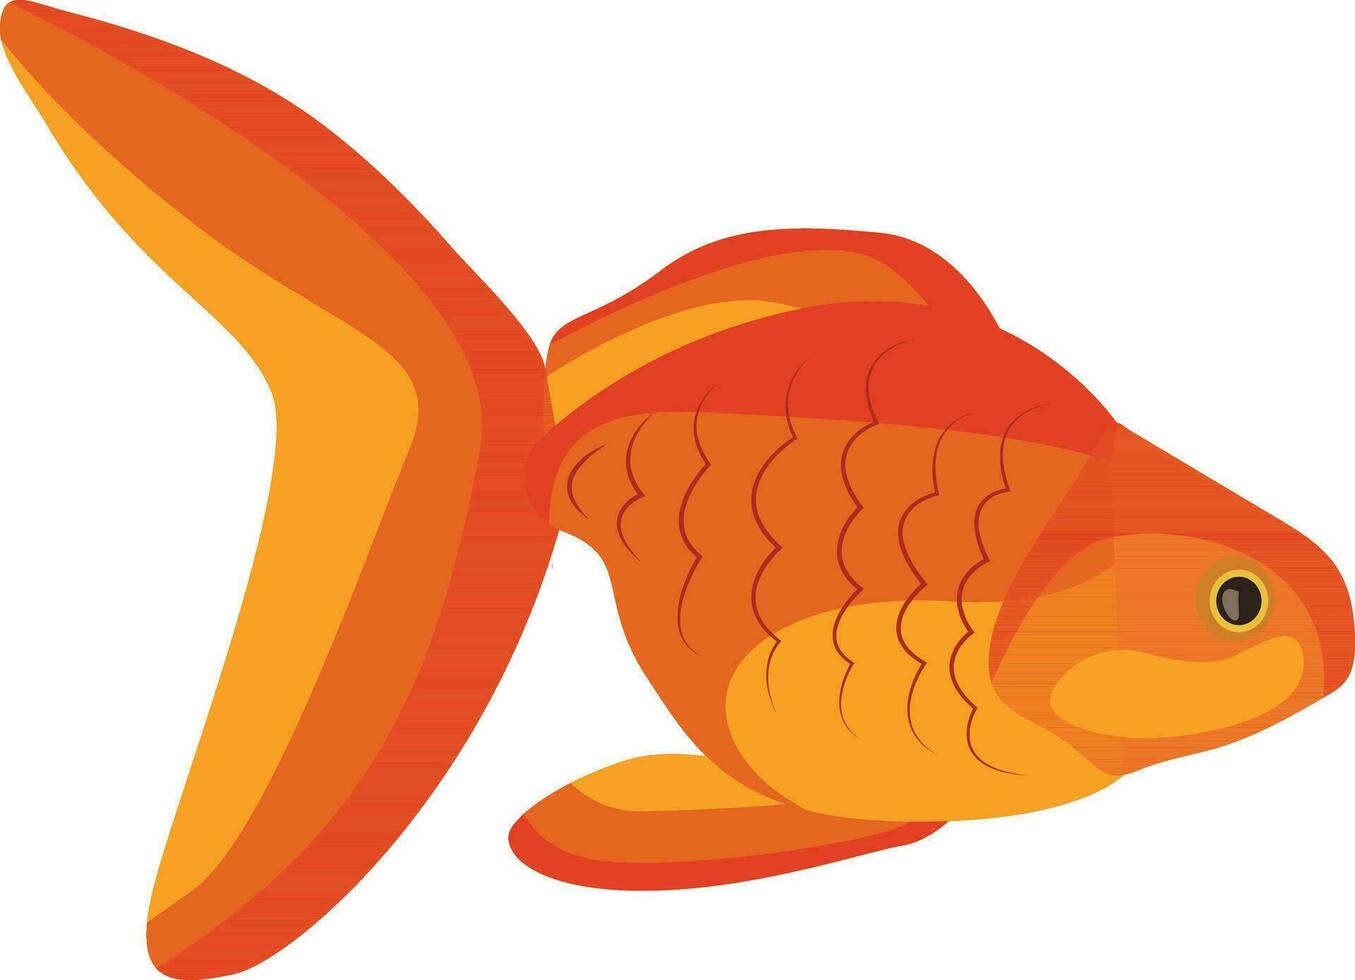 color fish illustration, silhouette of a goldfish from an aquarium, educational children's game vector